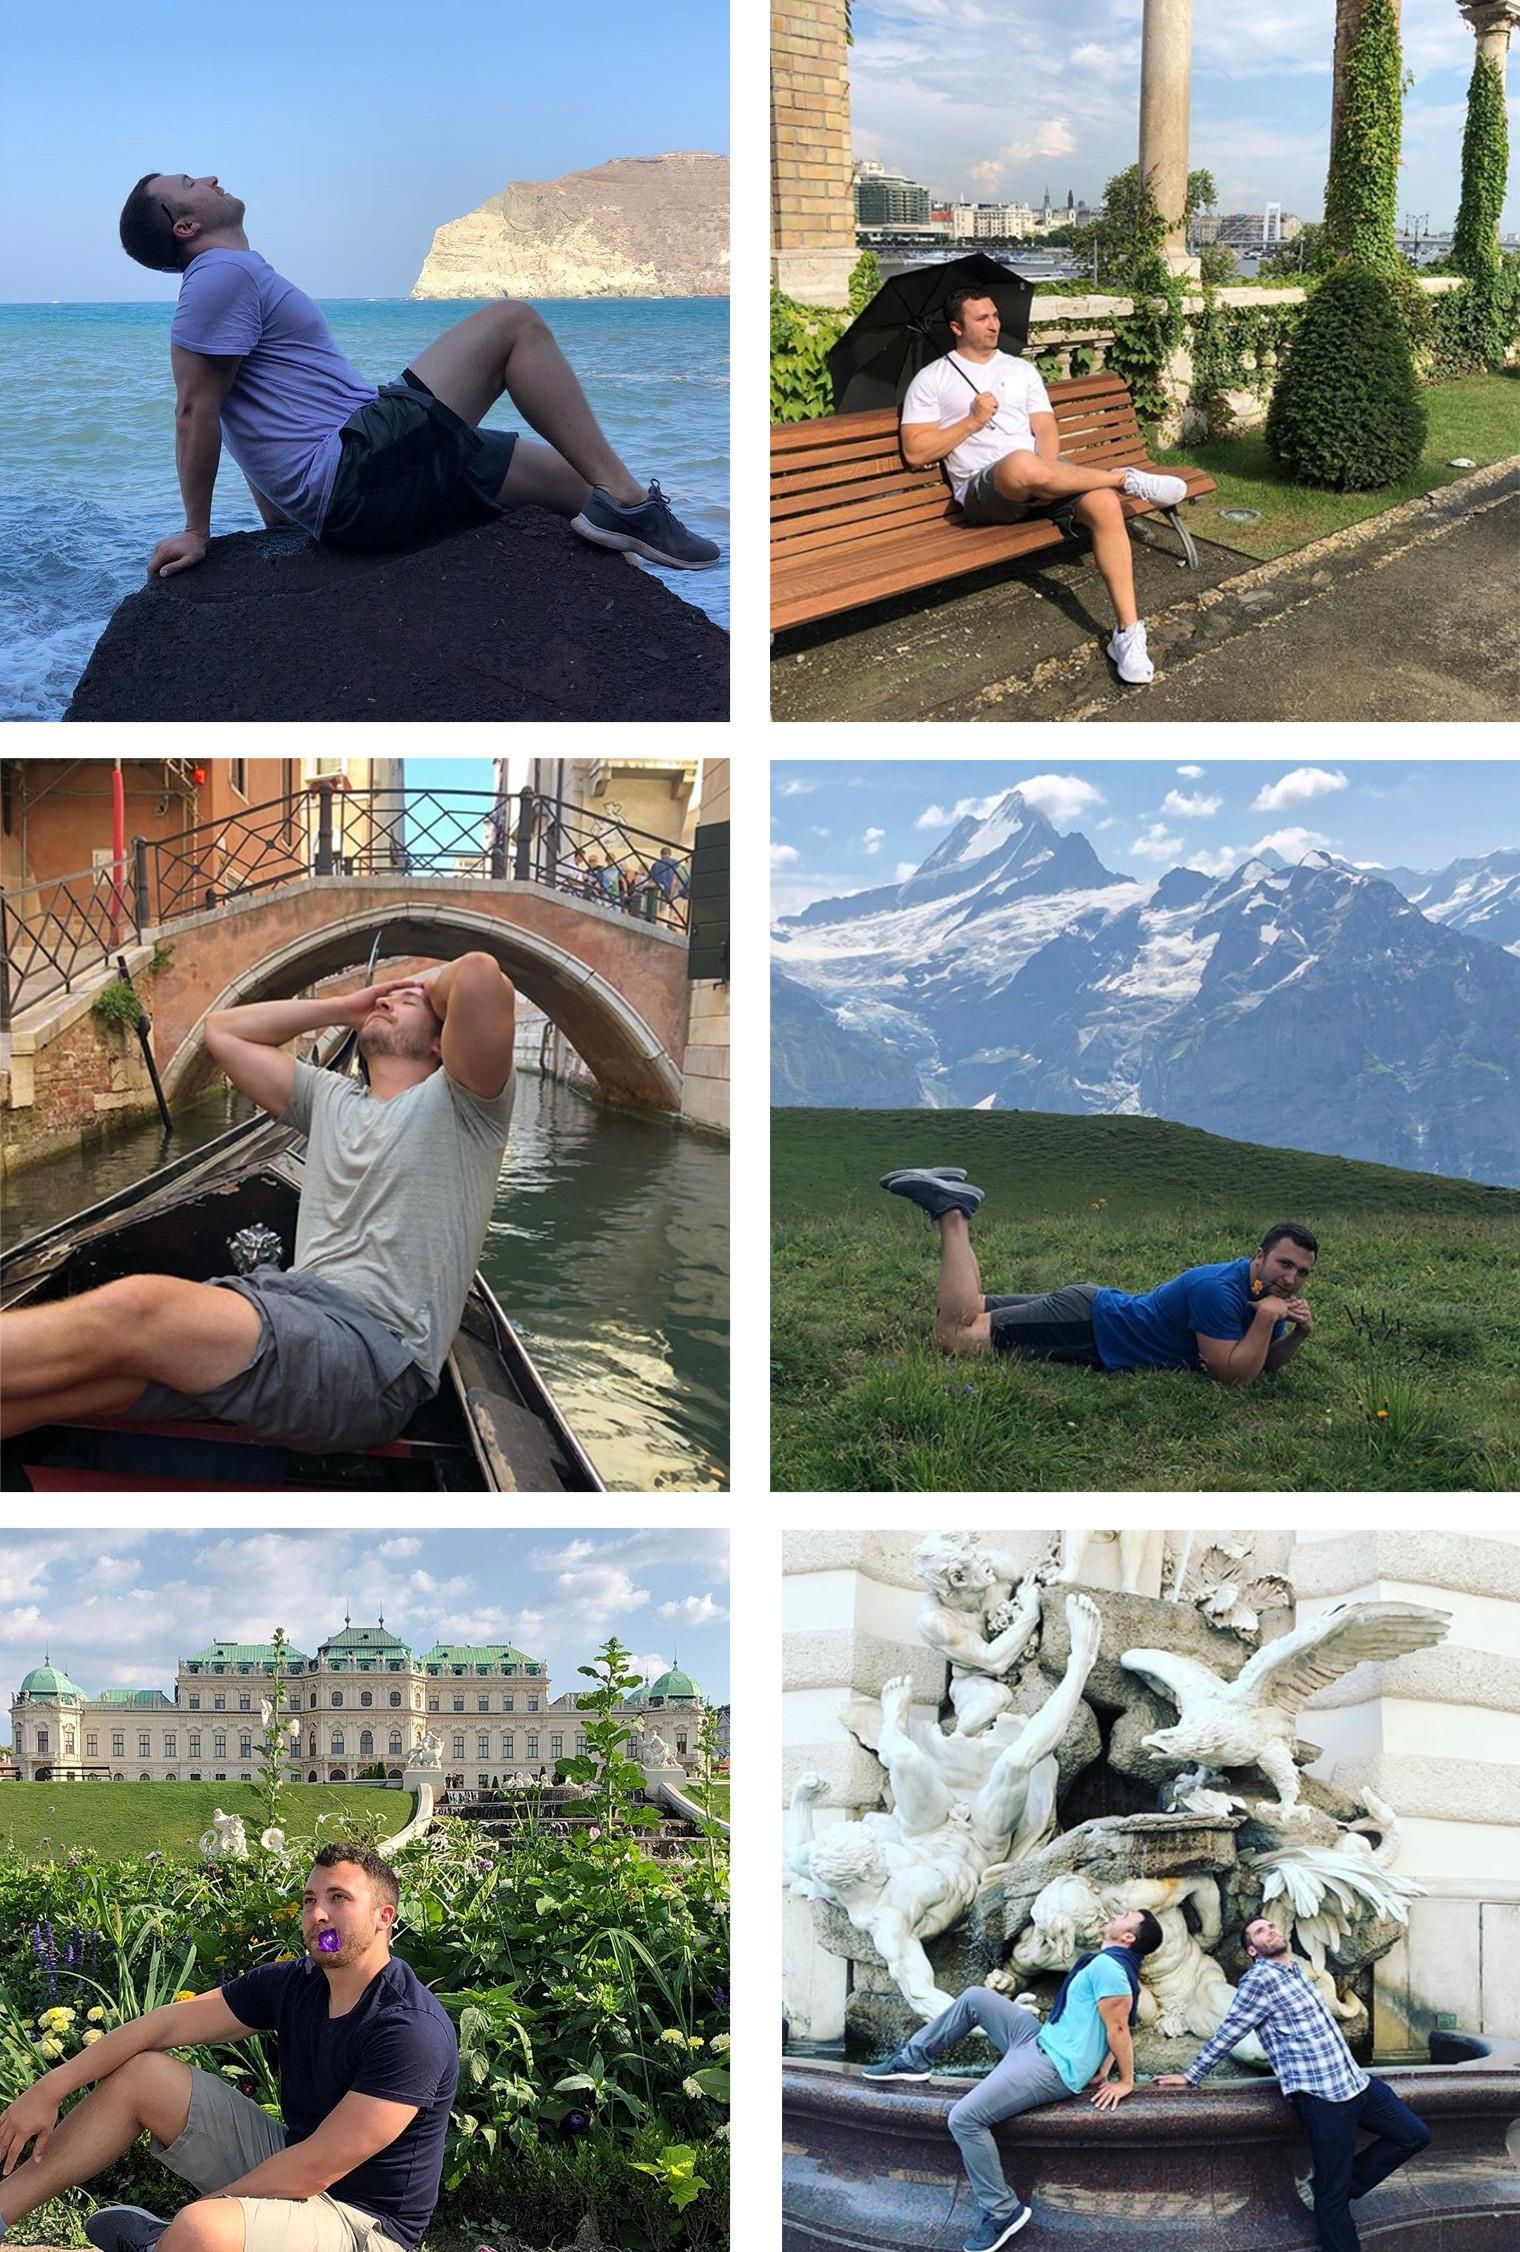 I spent 30 days in Europe and imitated as many "Insta models" as I could. The following are some of my favorites.